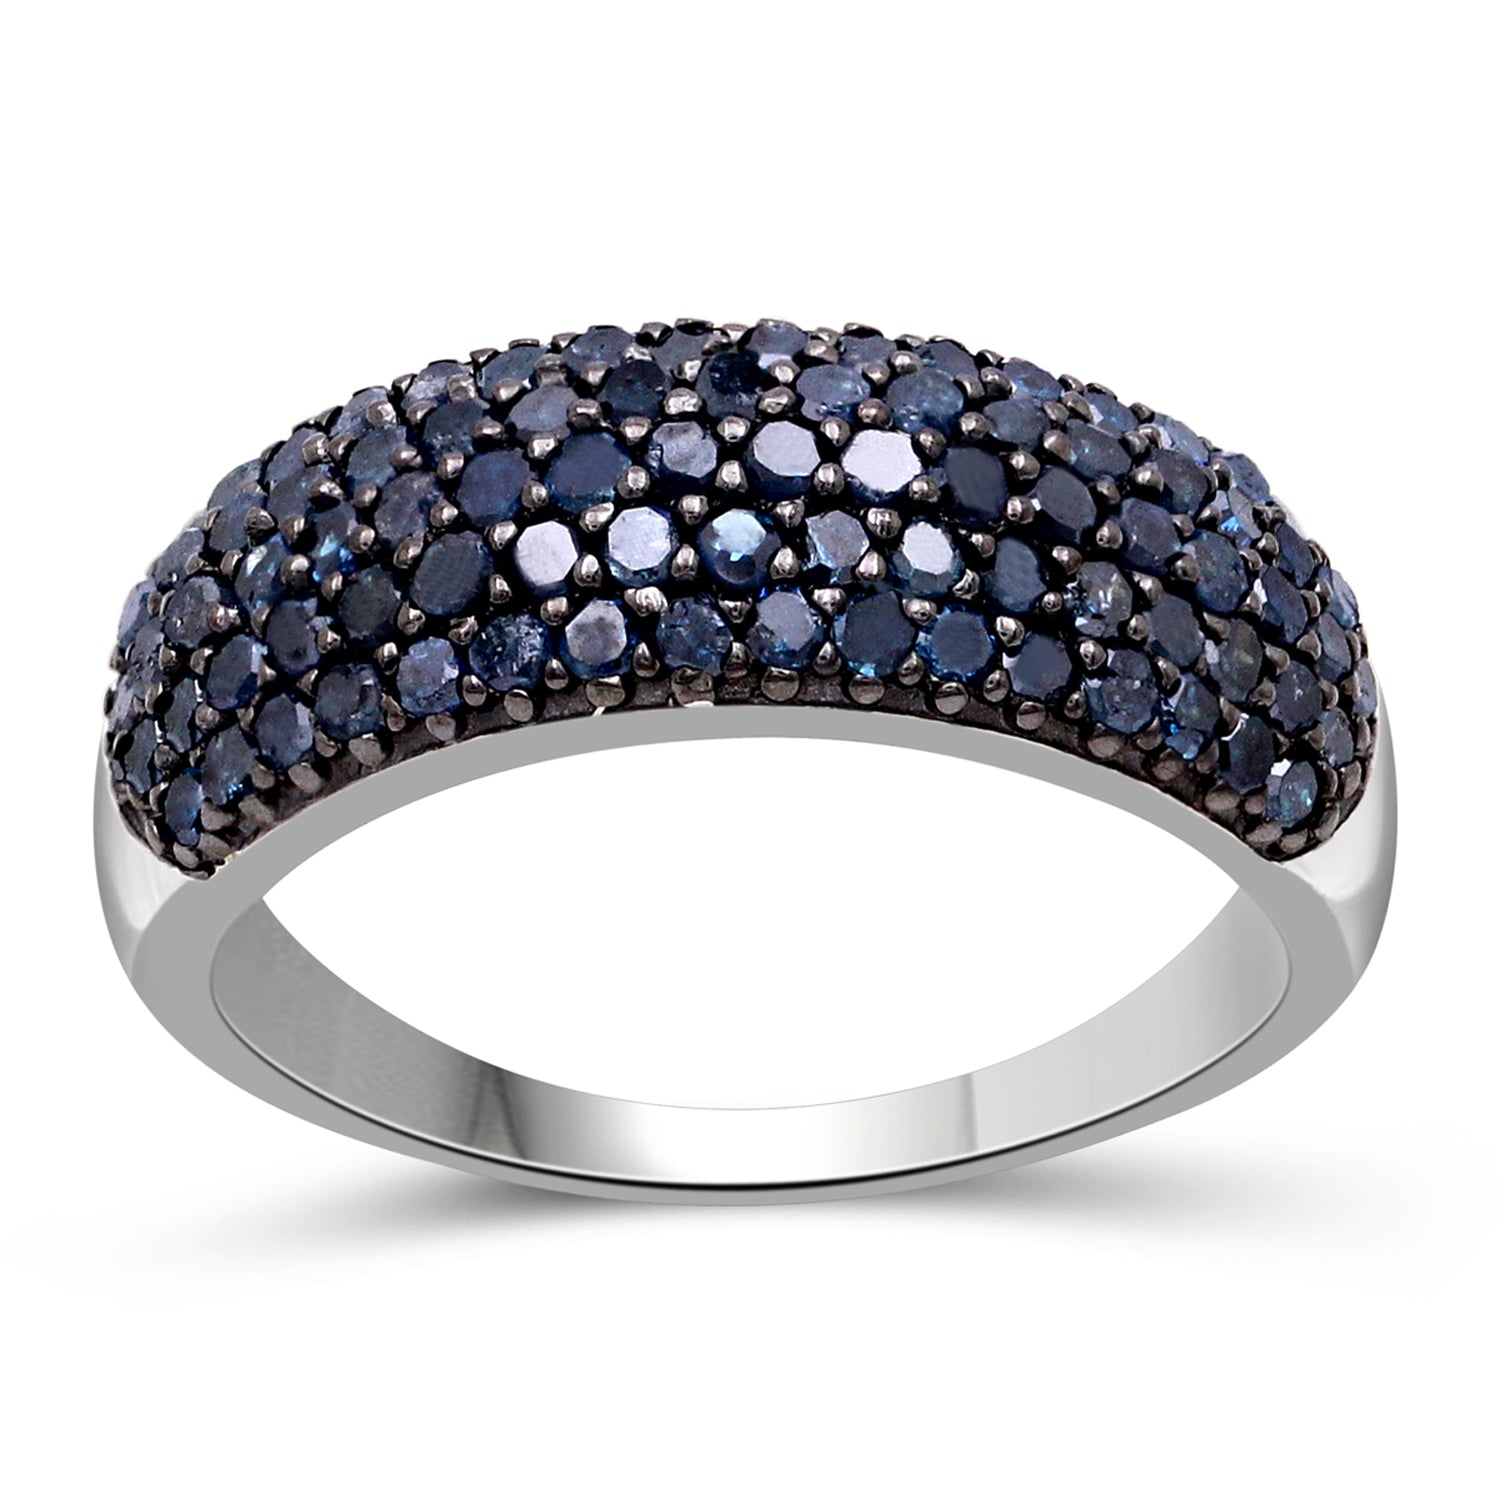 Sterling Silver Blue 1 Carat Diamond Ring for Women| Colored Ring Band with Round Diamonds